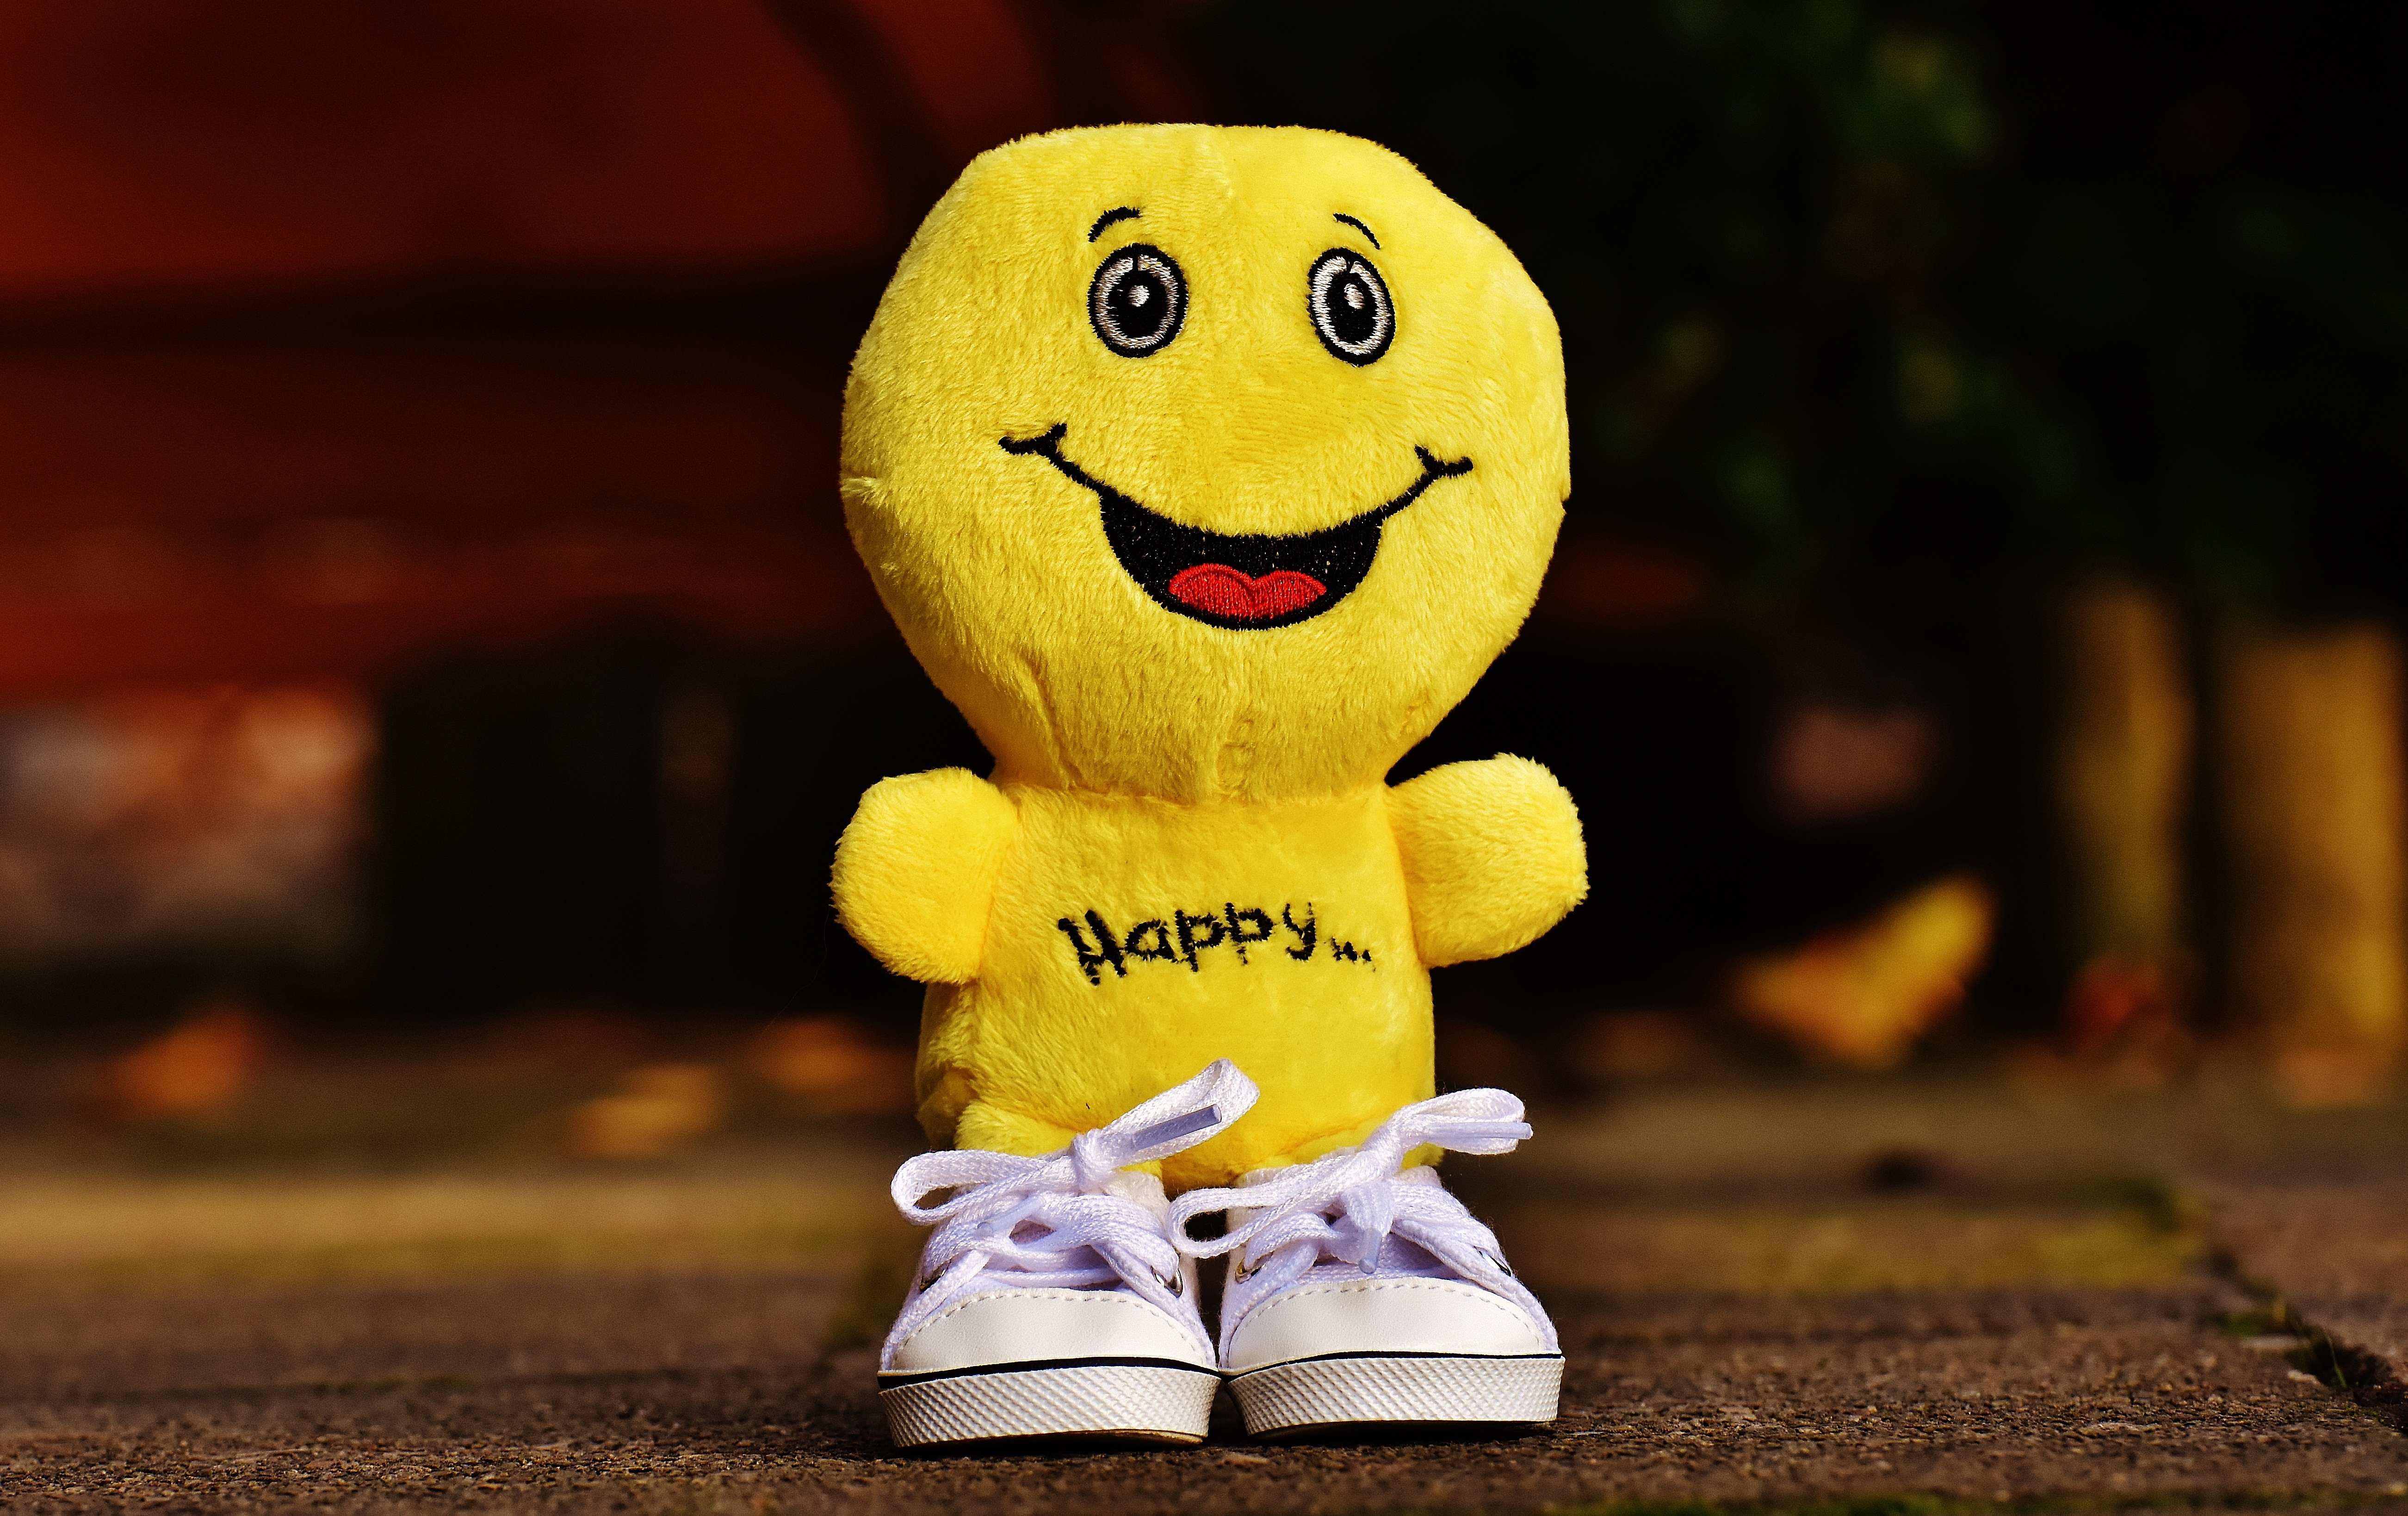 wallpapers happiness, miscellanea, toy, smiley, emoticon, smile, miscellaneous